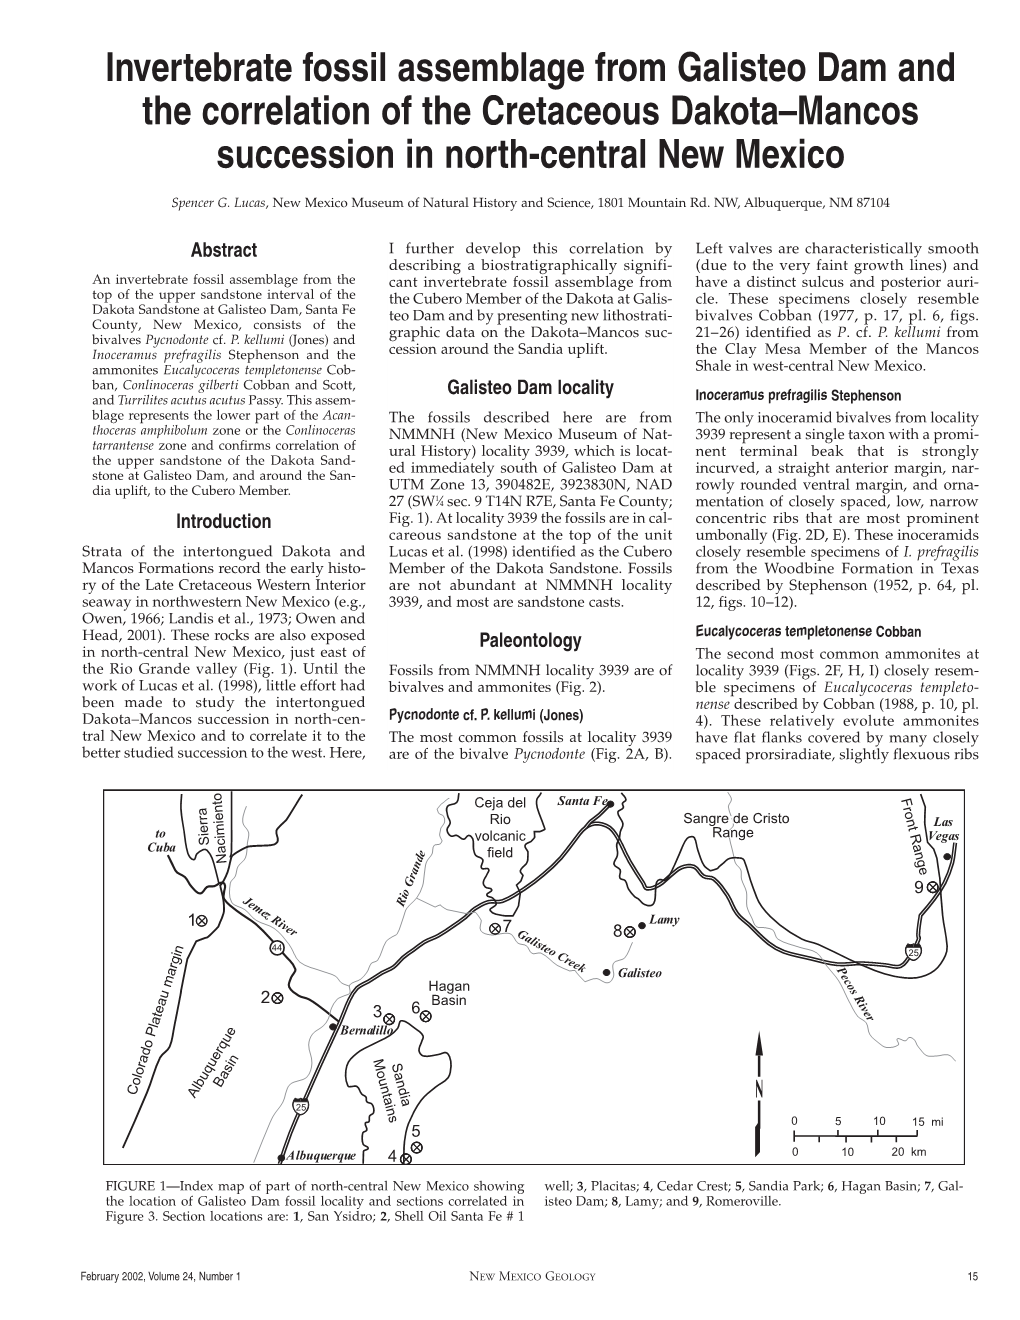 Invertebrate Fossil Assemblage from Galisteo Dam and the Correlation of the Cretaceous Dakota–Mancos Succession in North-Central New Mexico